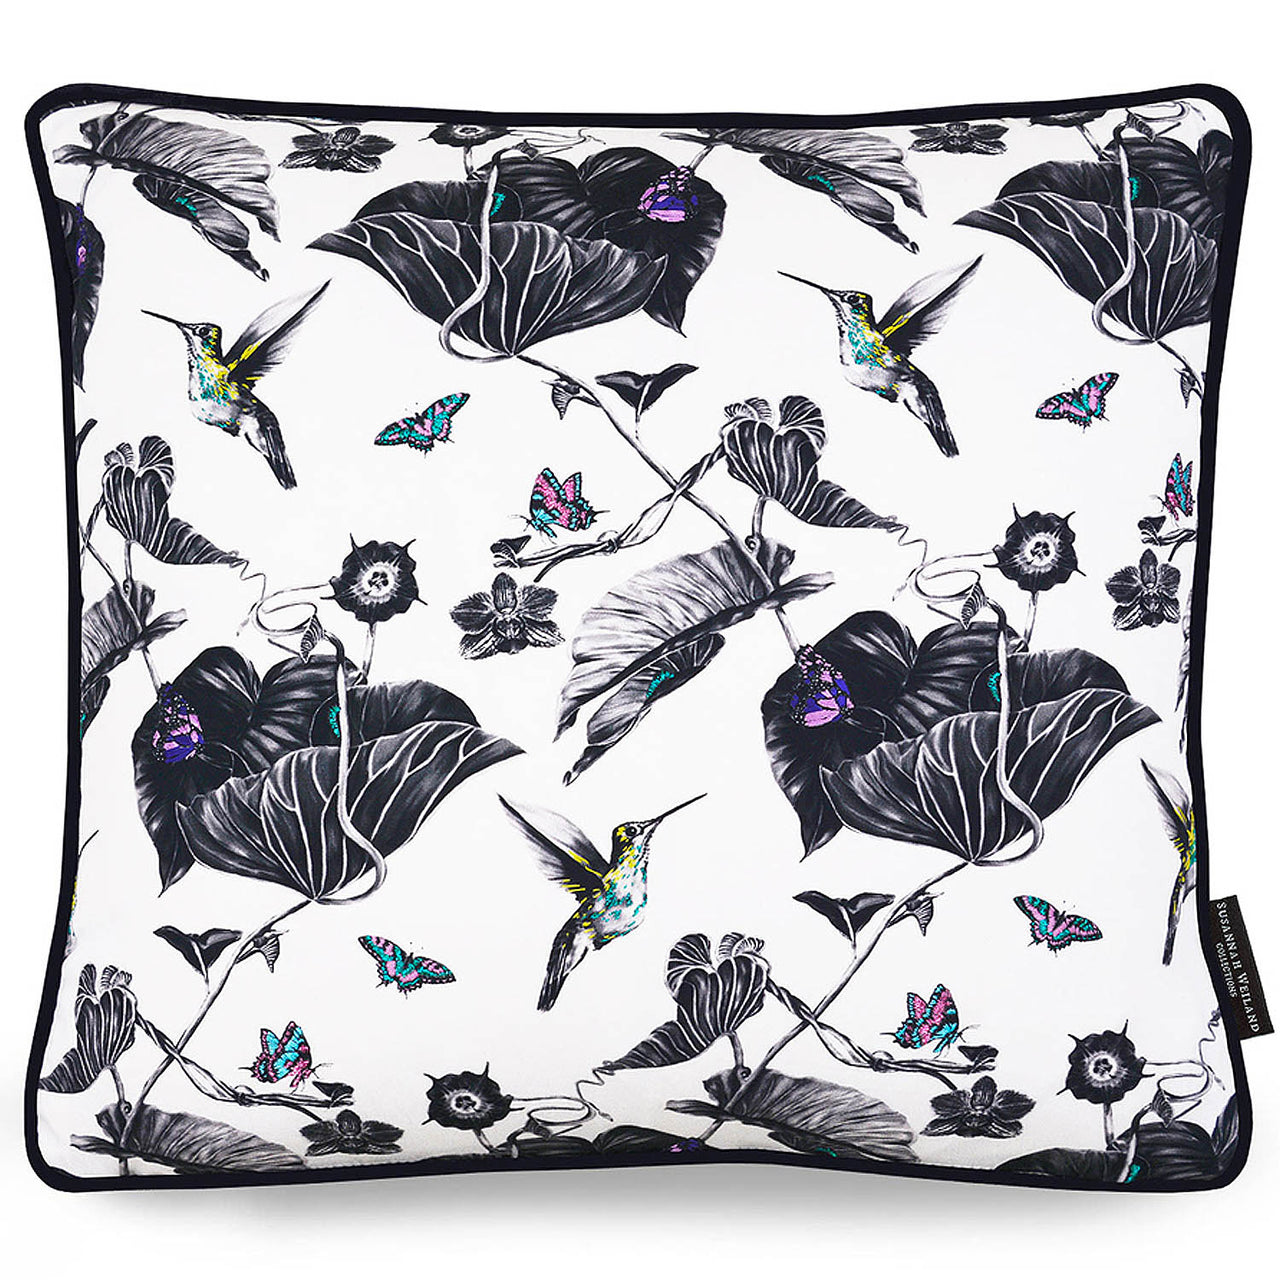 Cushion with Hummingbirds Print and highlight of hand embroidery